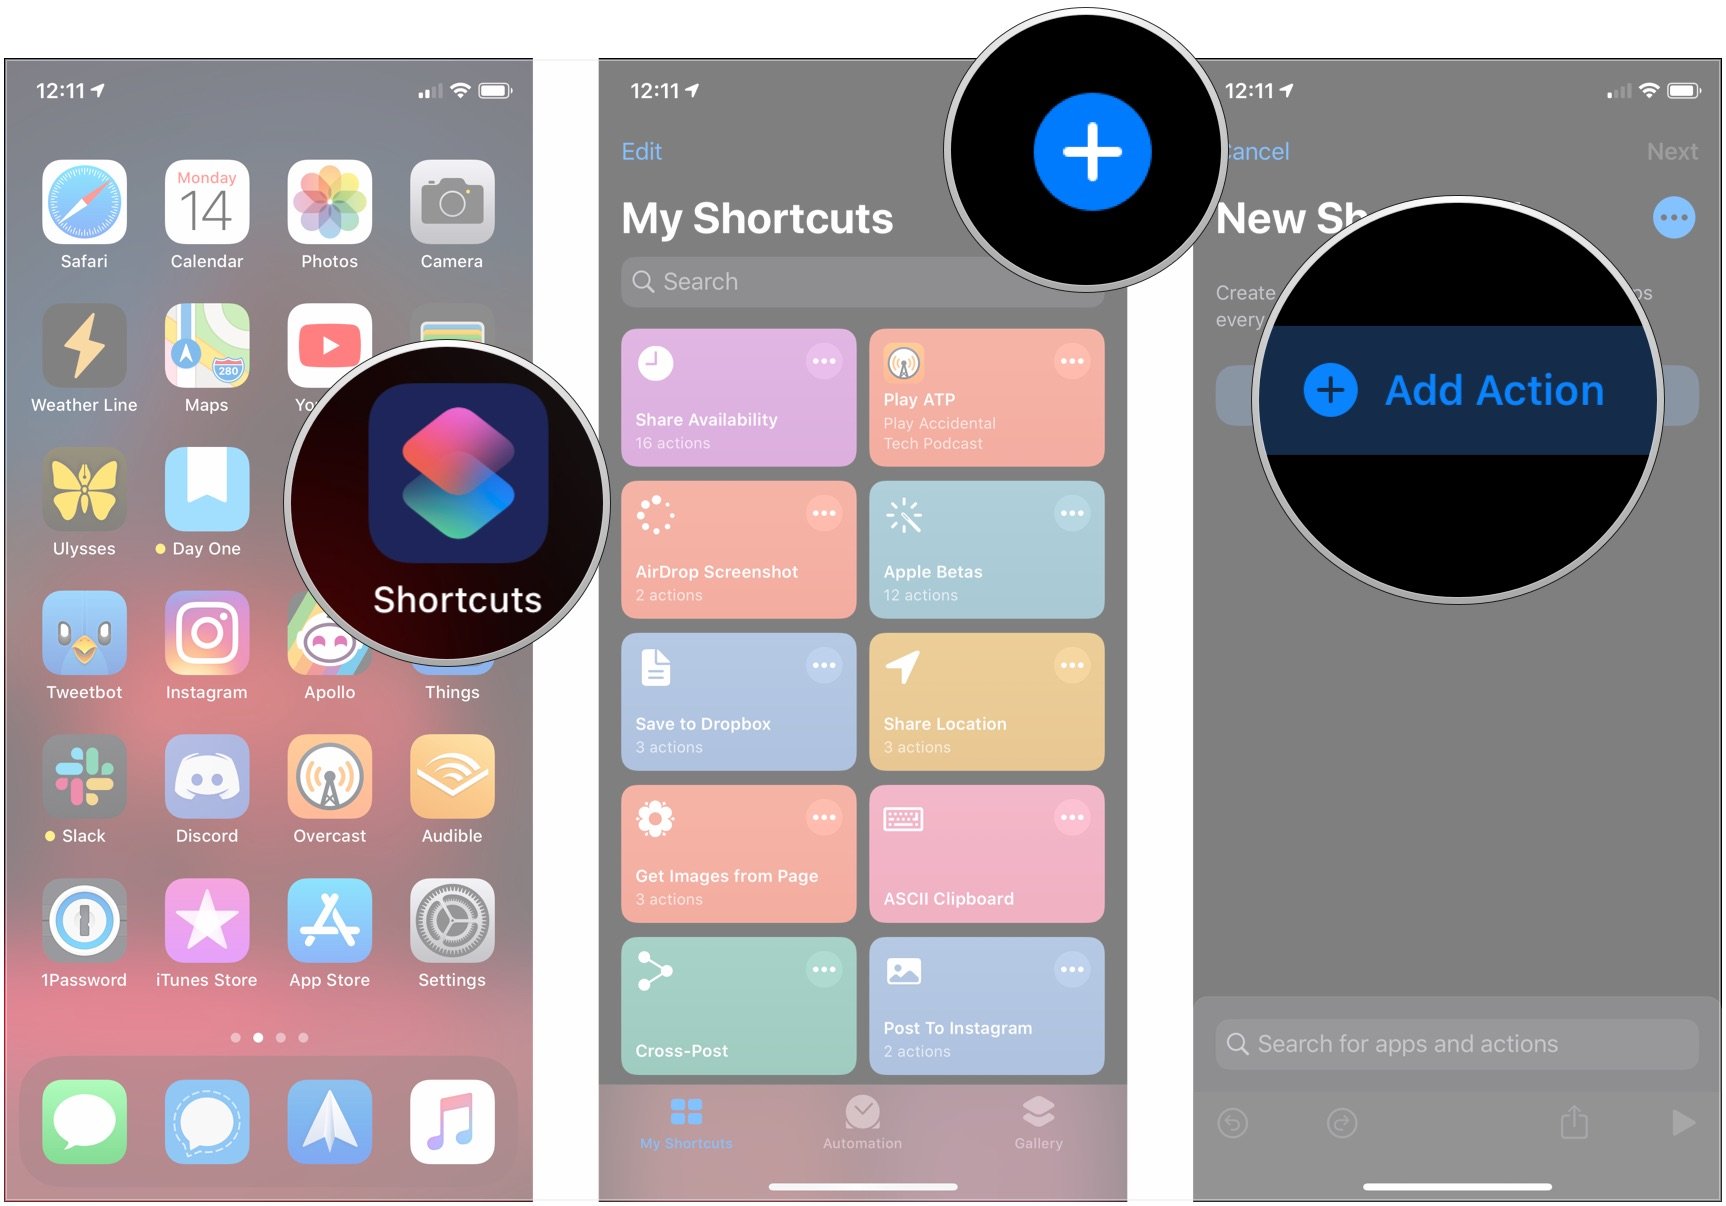 Open Shortcuts, tap +, tap Add Action